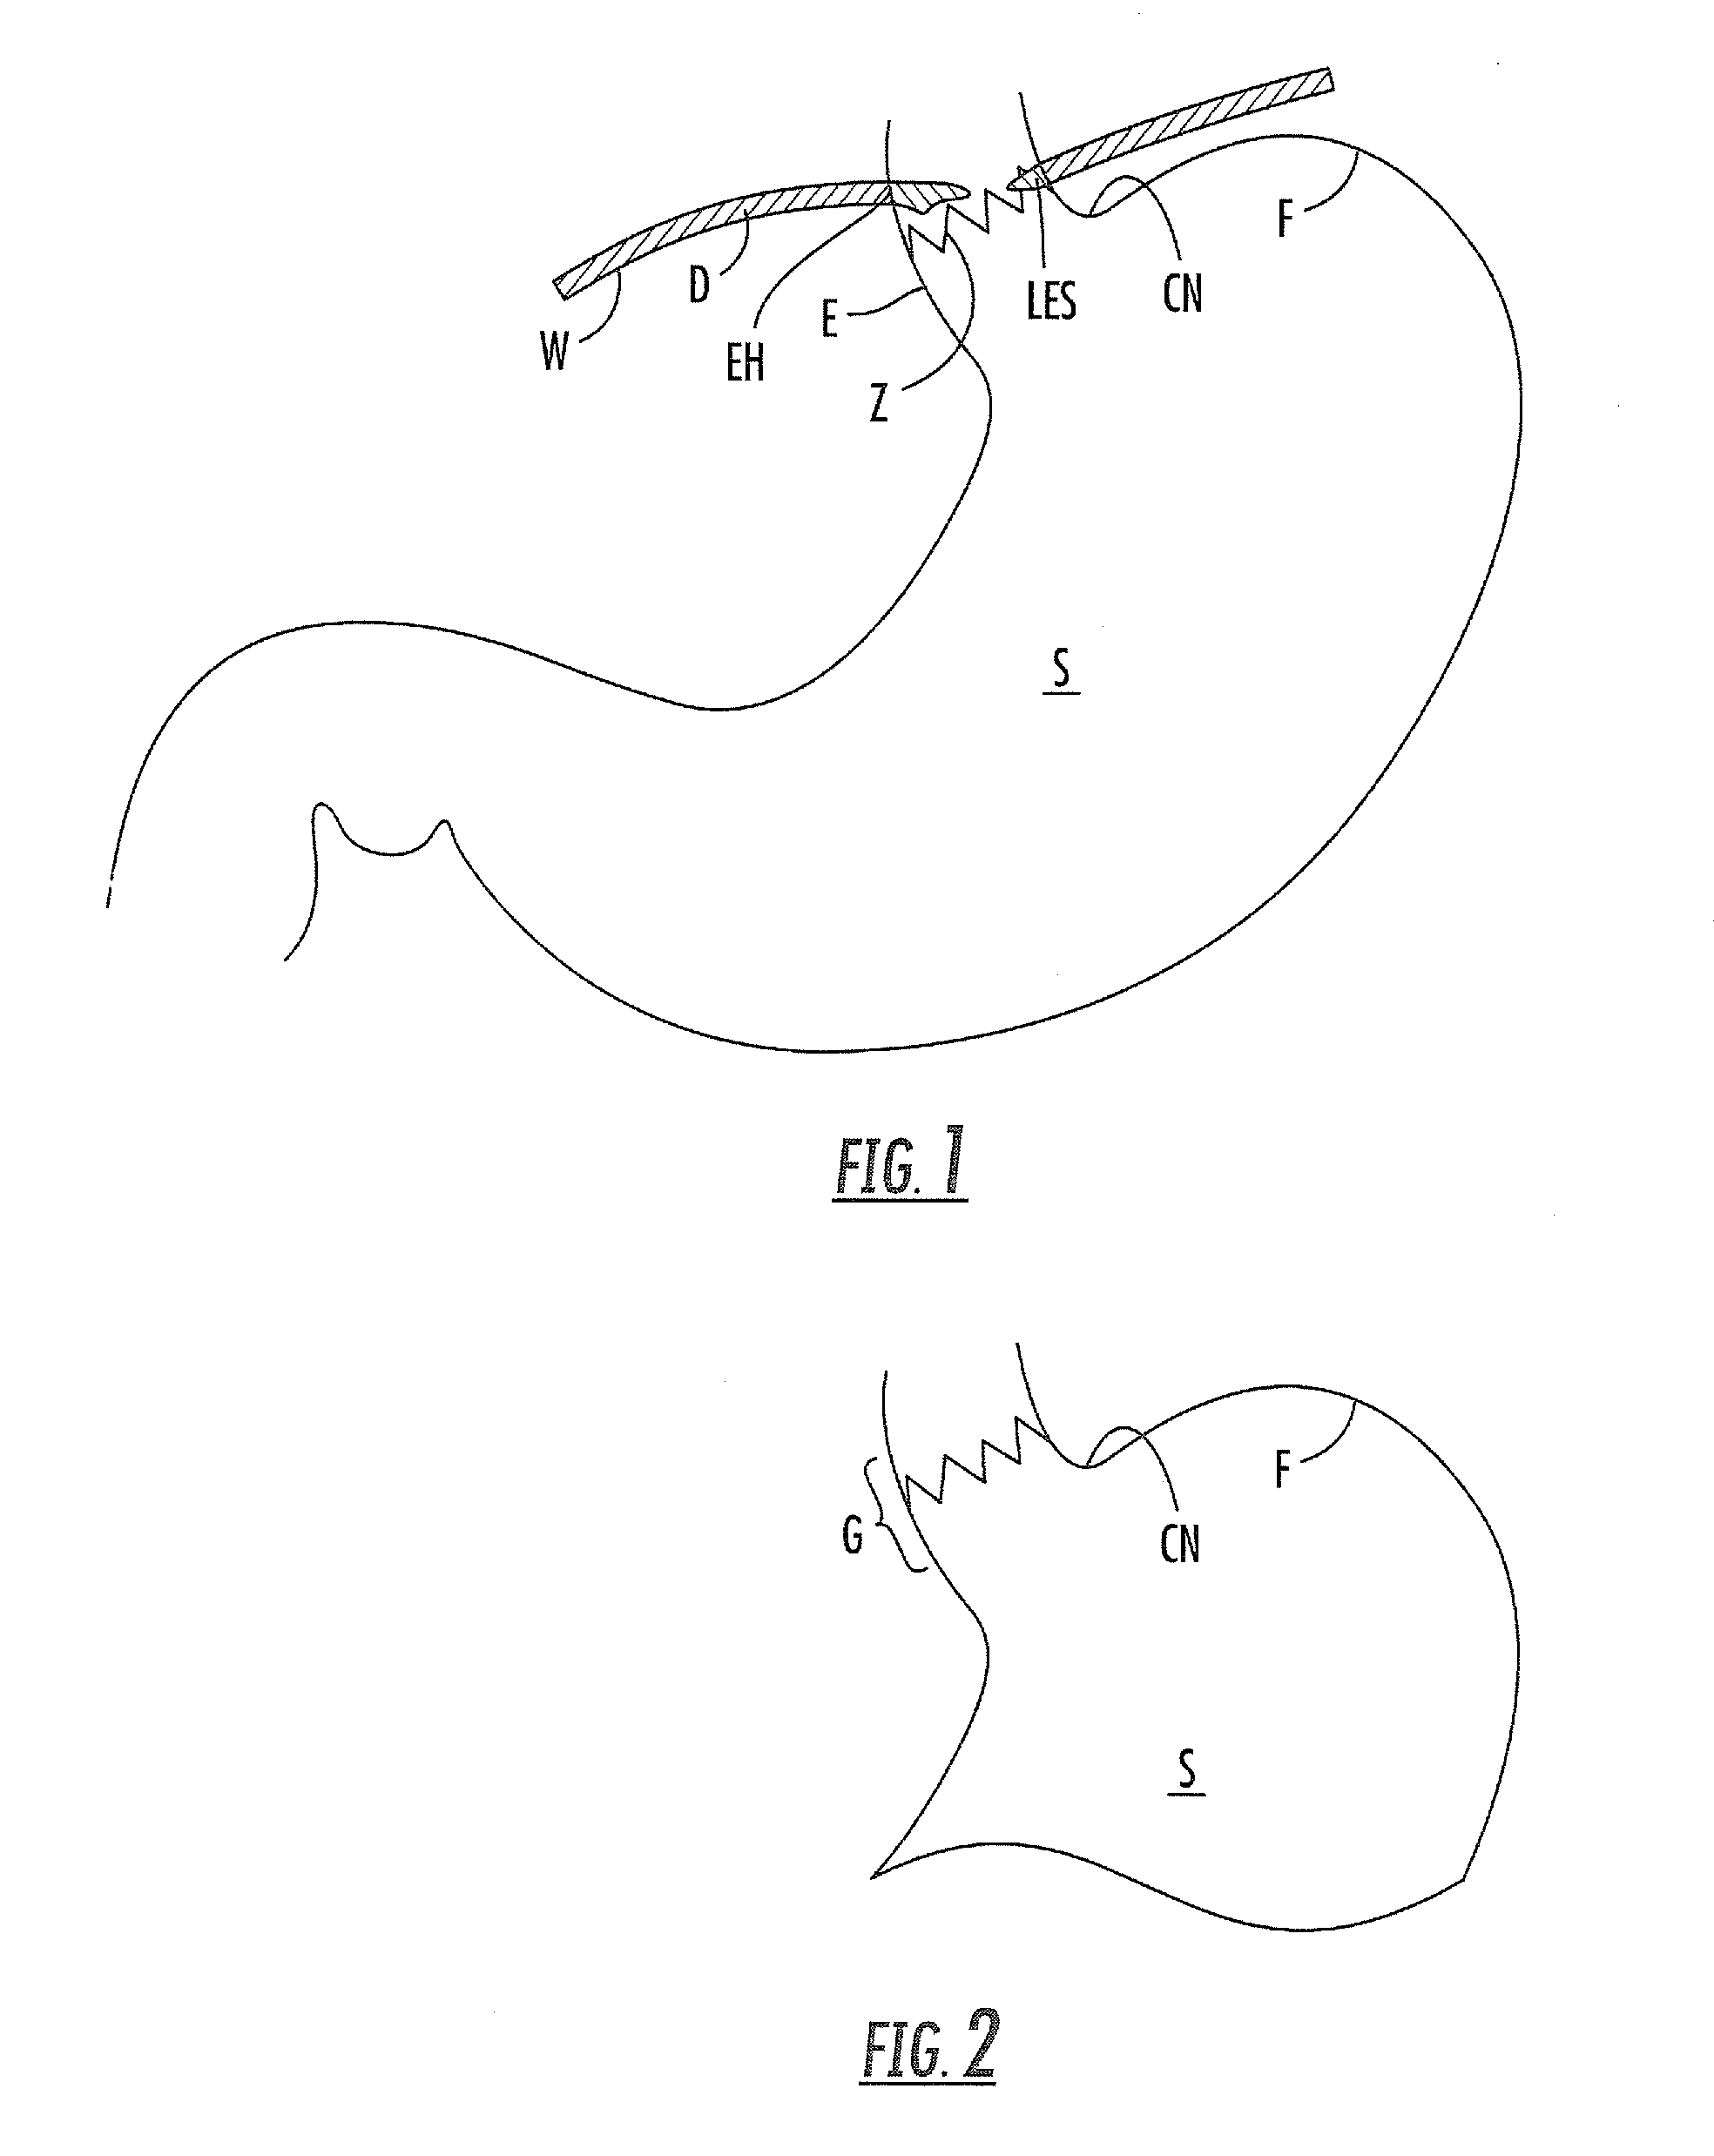 Devices for treating gastroesophageal reflux disease and hiatal hernia, and methods of treating gastroesophageal reflux disease and hiatal hernia using same